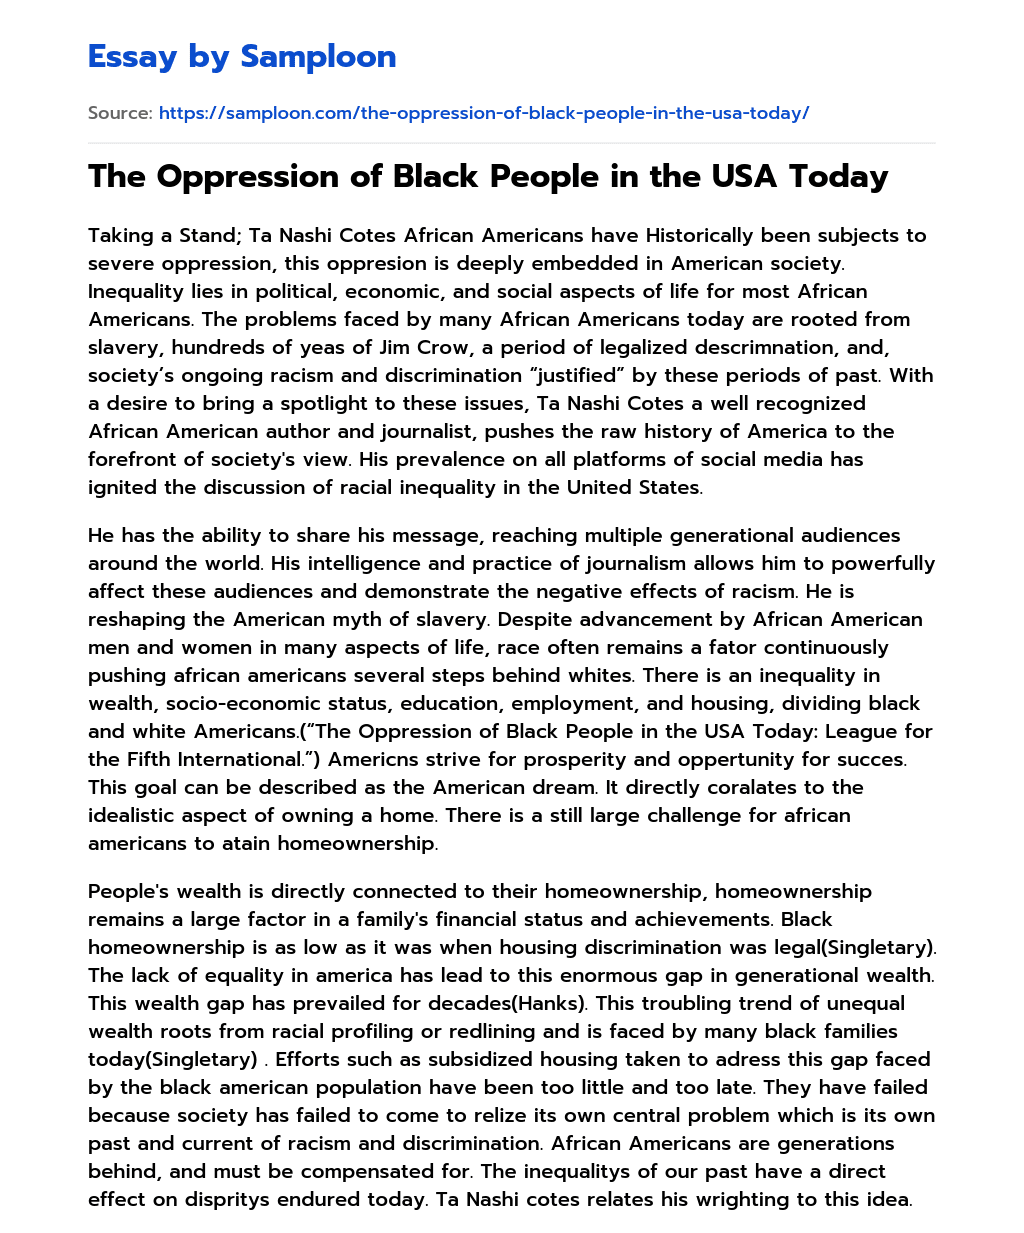 The Oppression of Black People in the USA Today essay